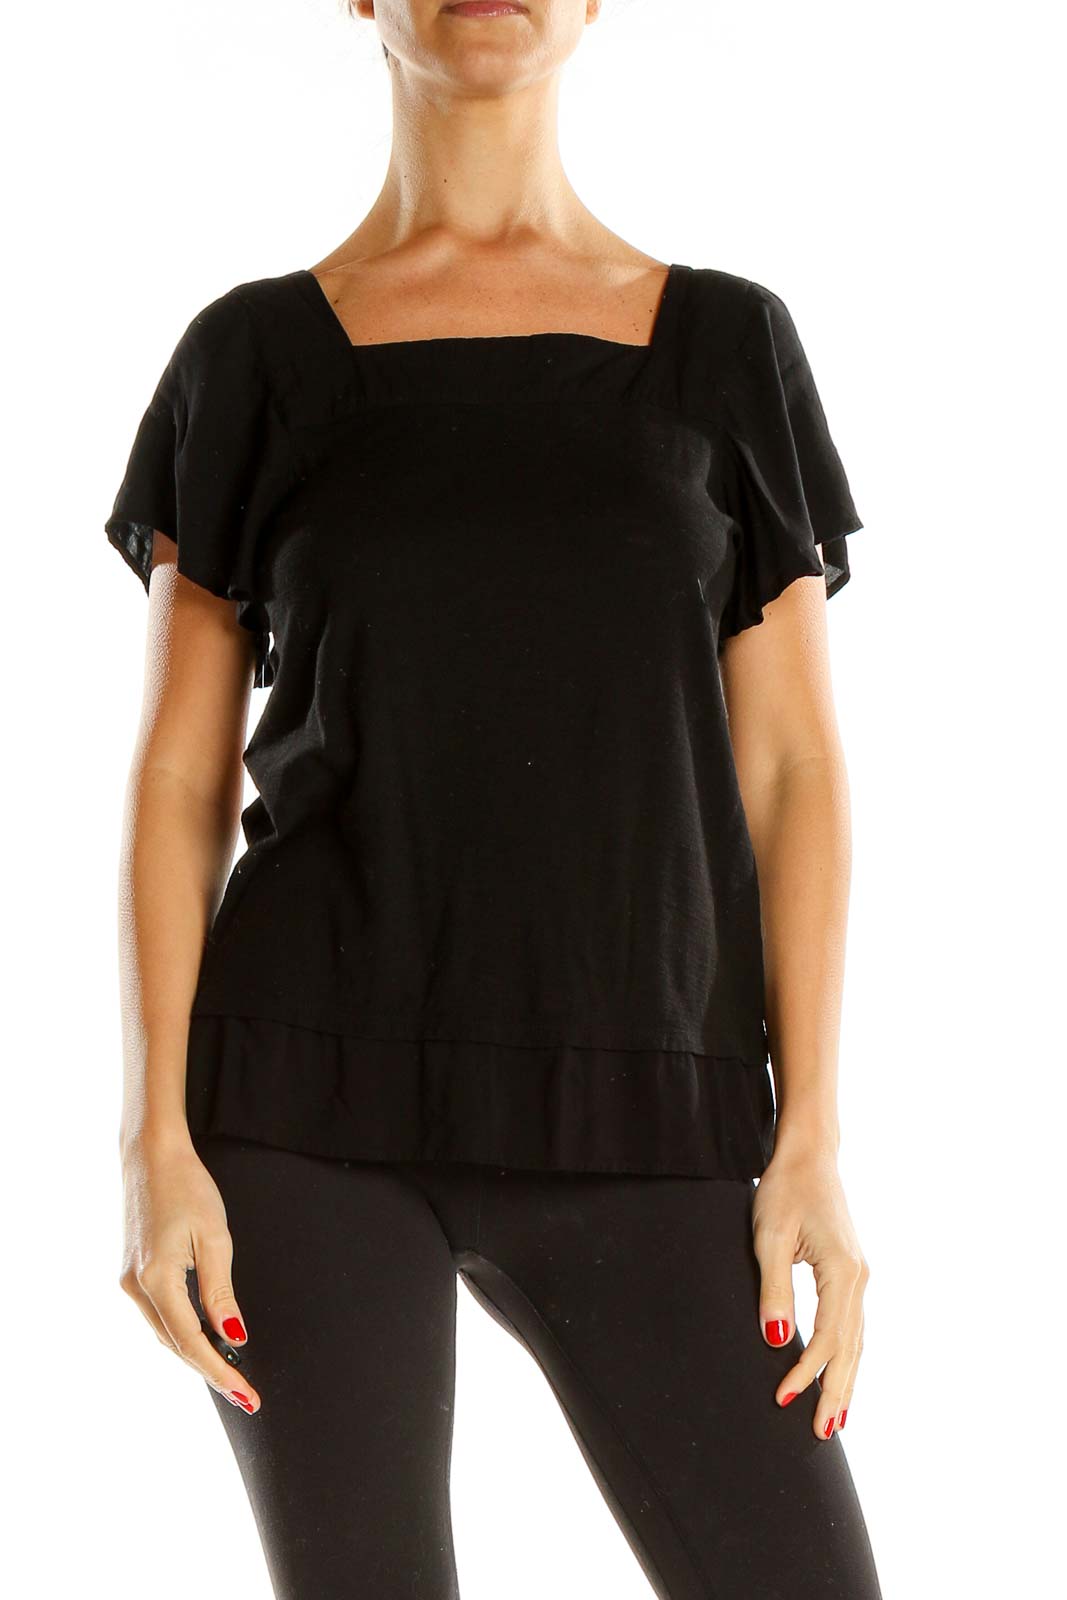 Black Square Neck All Day Wear Top Front